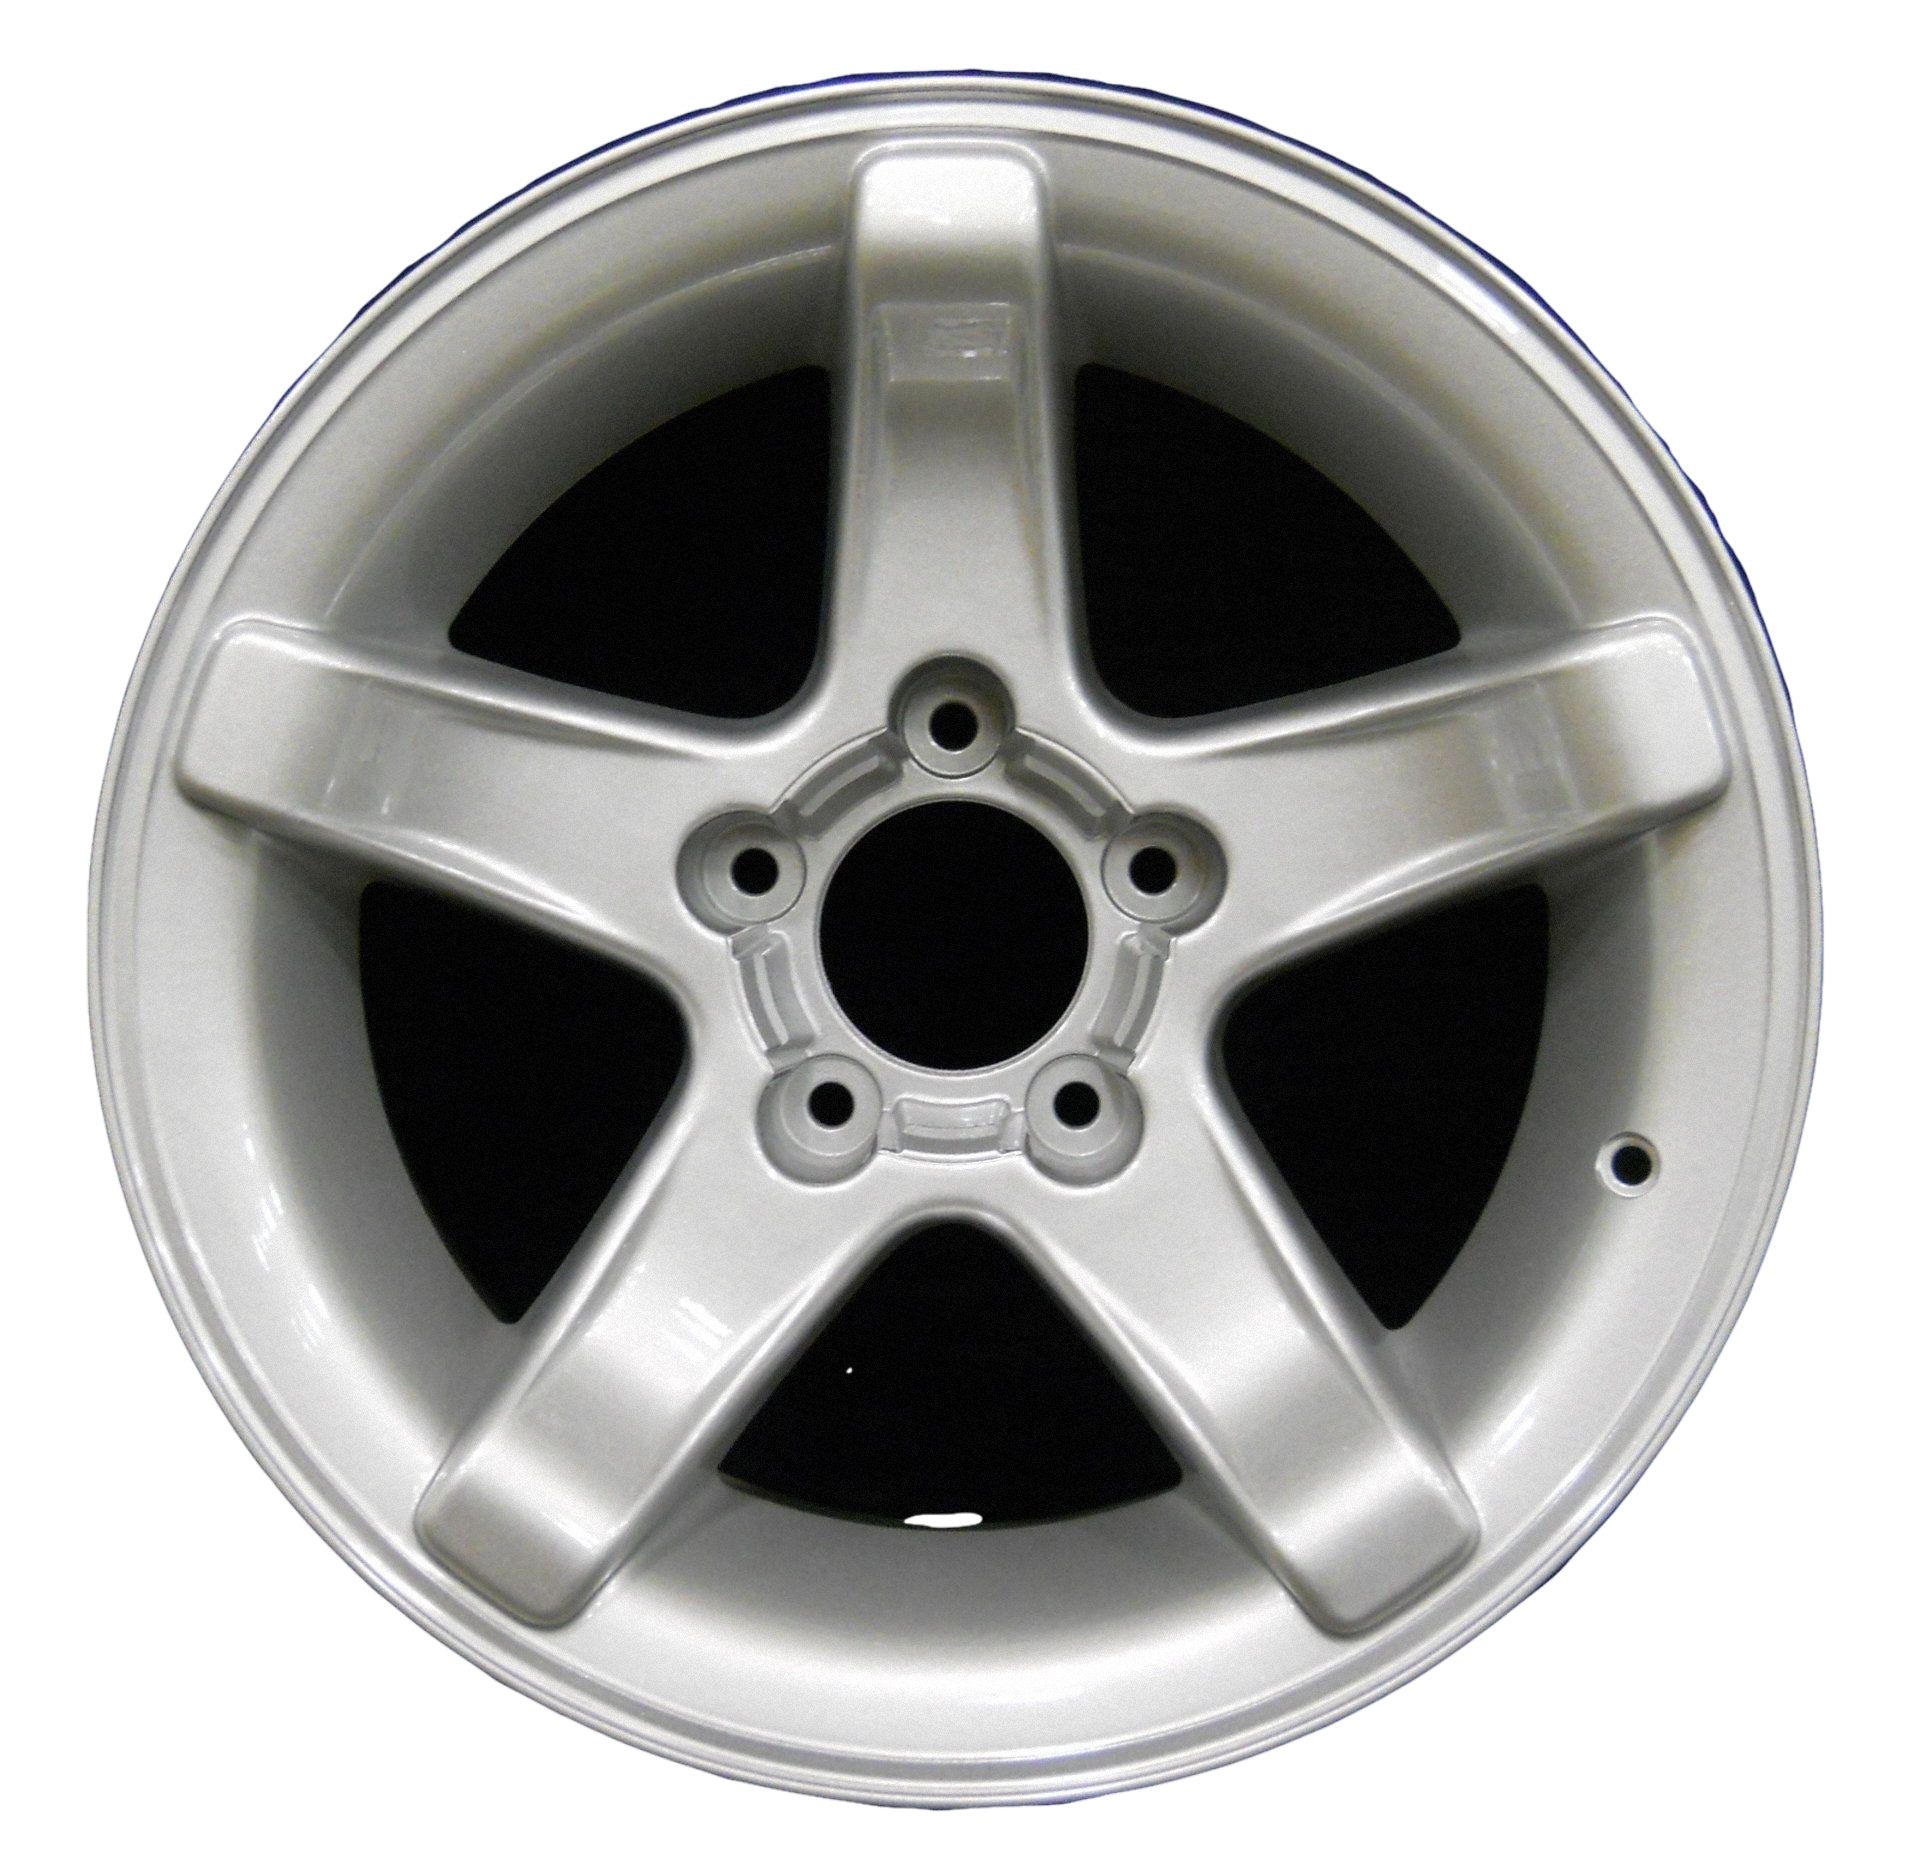 Ford F150 Truck  1999, 2000 Factory OEM Car Wheel Size 18x9.5 Alloy WAO.3348.PS02.FF